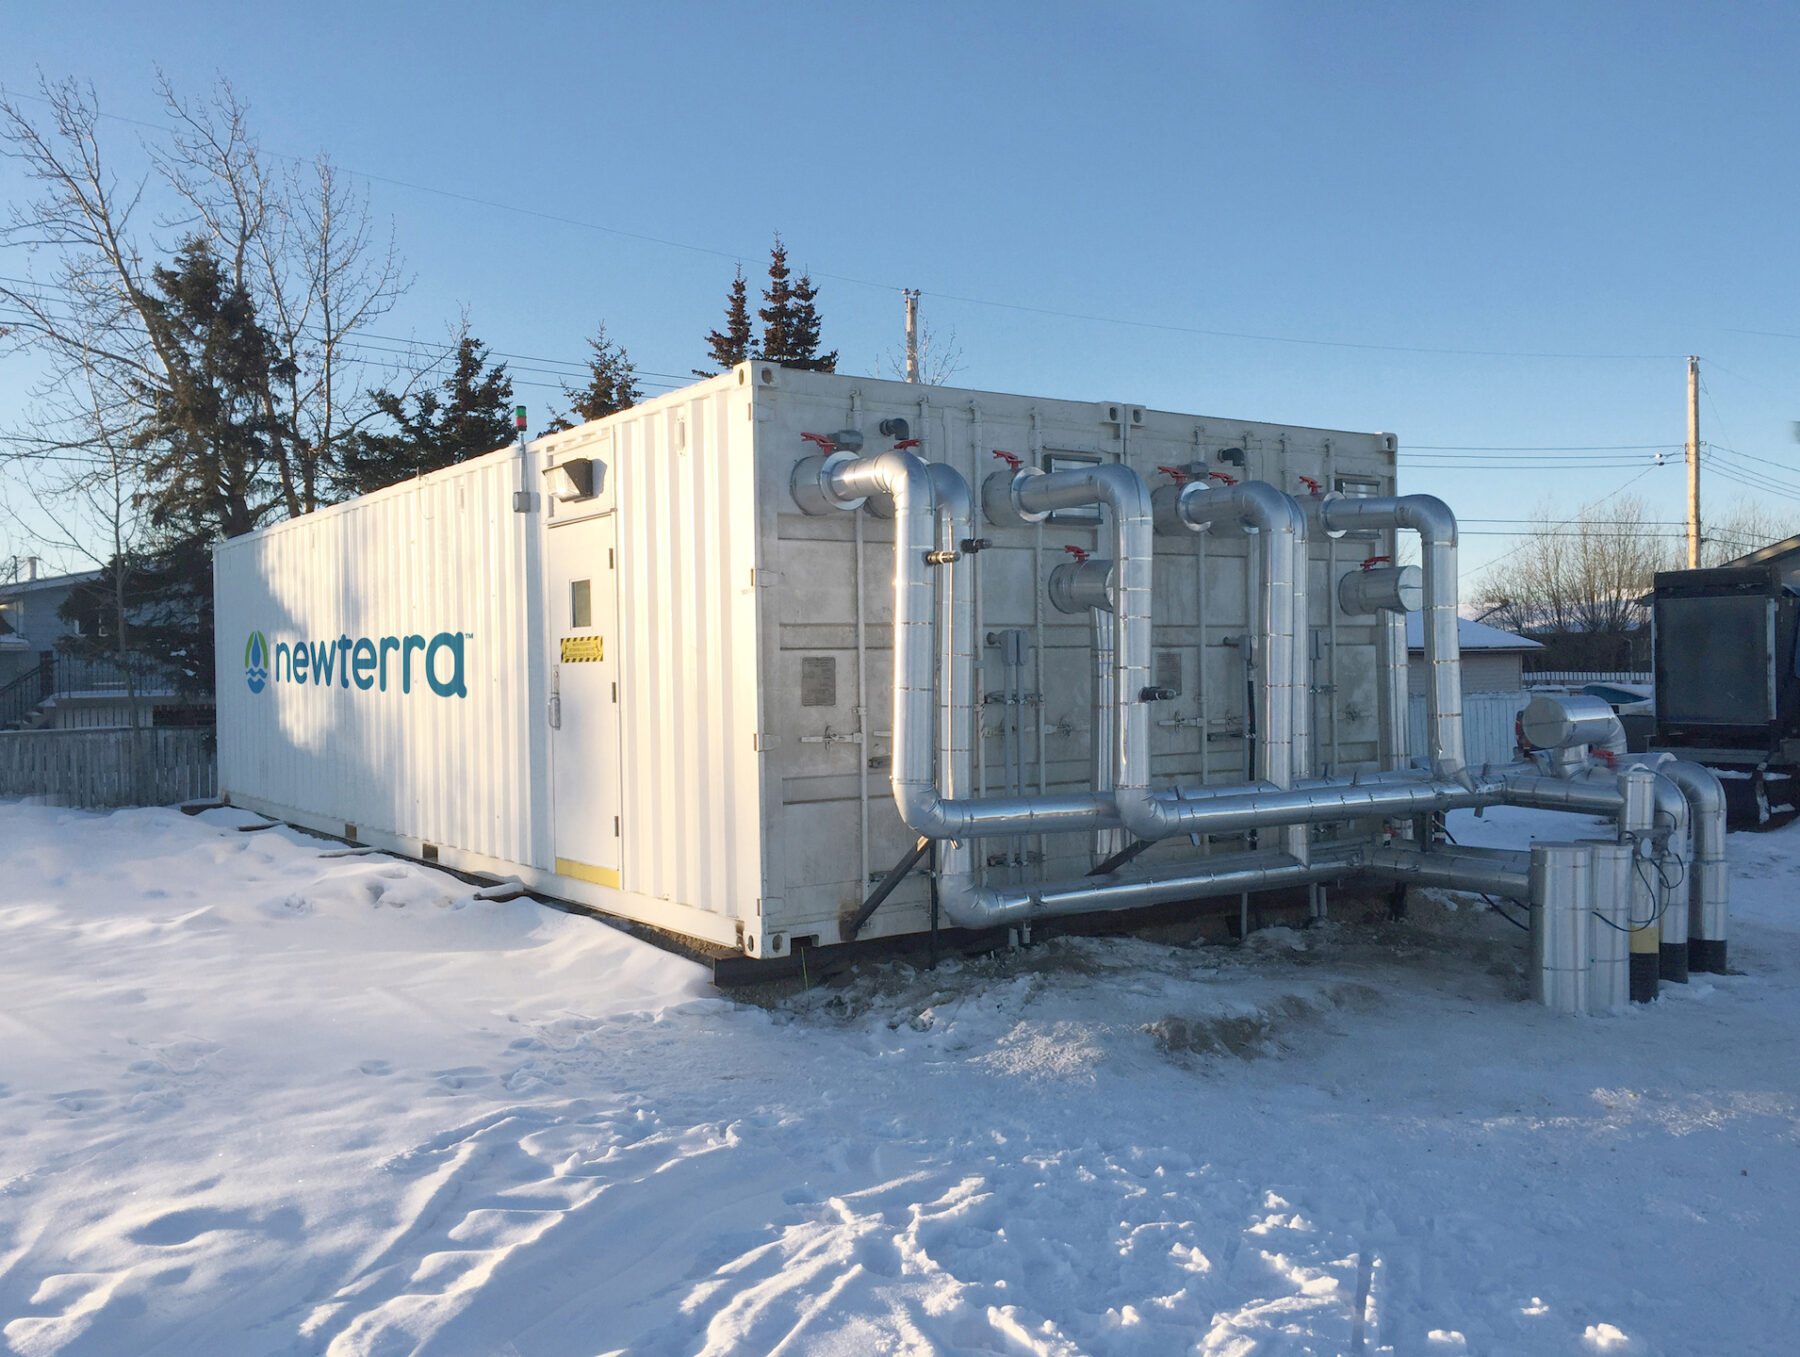 Newerra modular wastewater treatment technology consisting of a double wide shipping container with eight pipes connecting to a water in or outflow for treating water in a winter setting